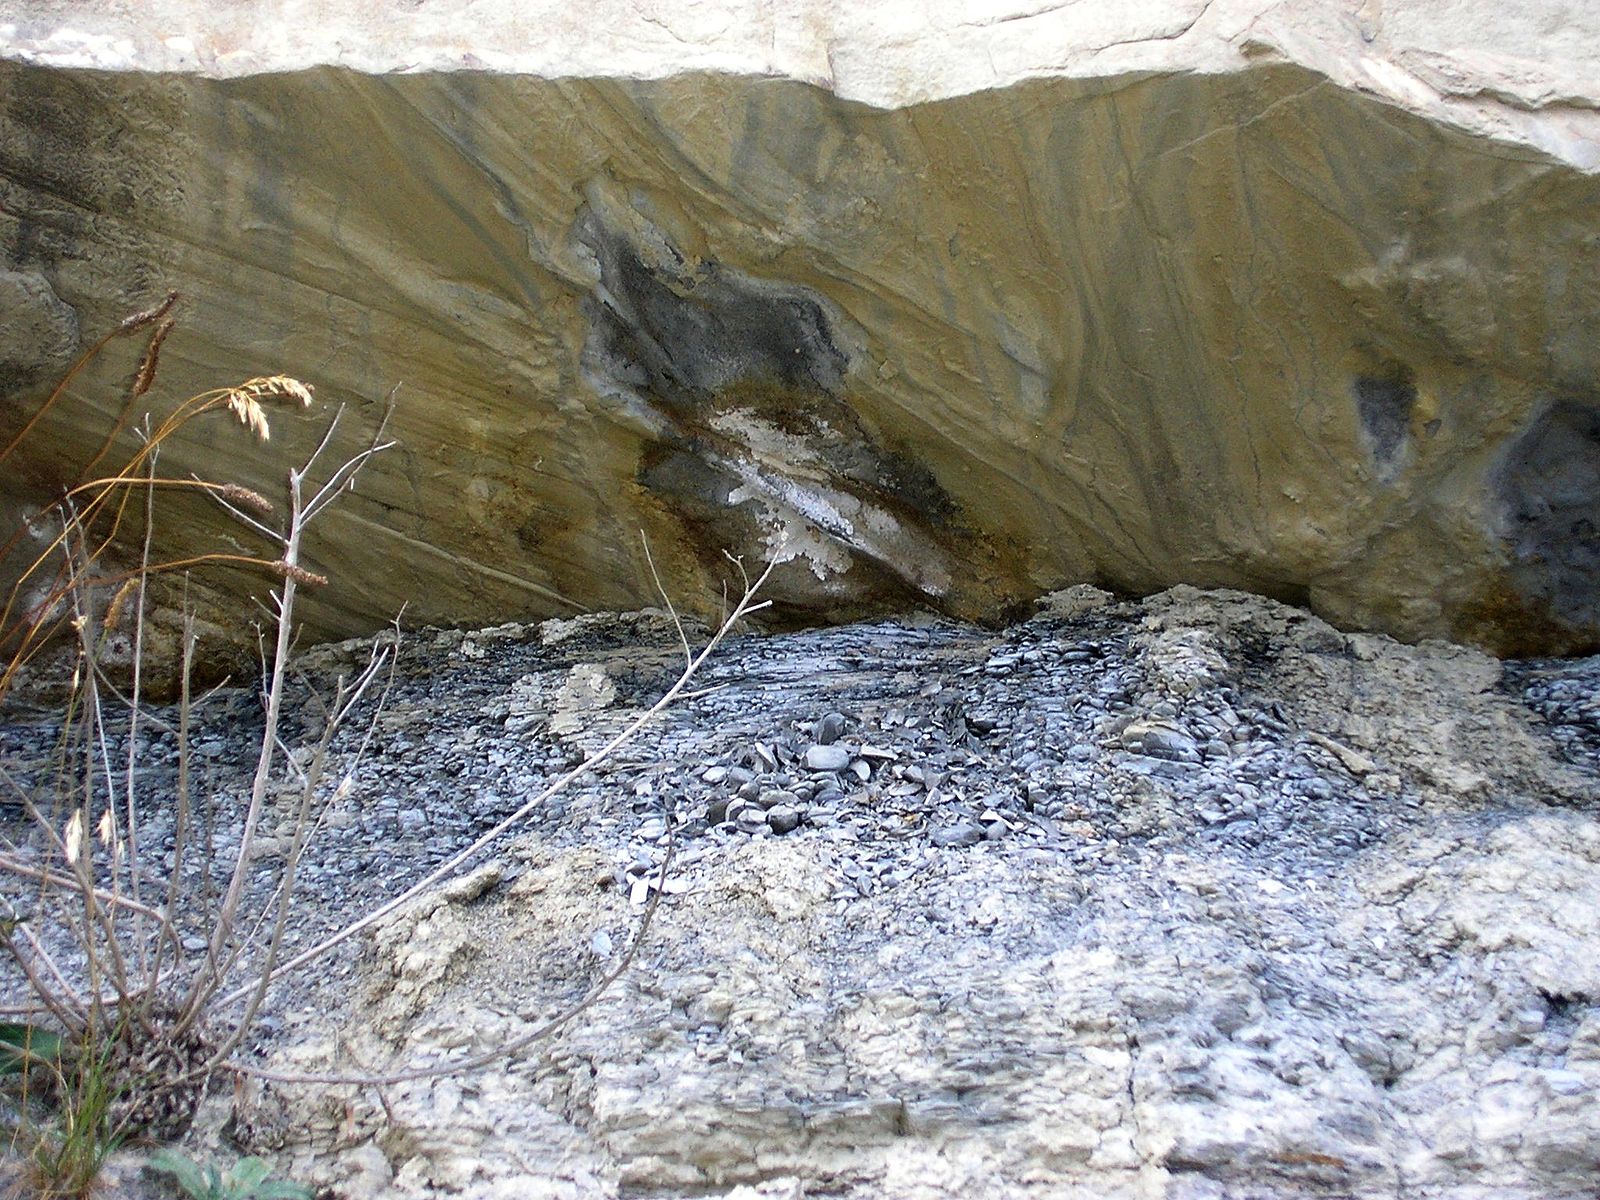 A view of the bottom of a tan and gray rock with visible narrow, parallel ridges that go across the base of the rock.